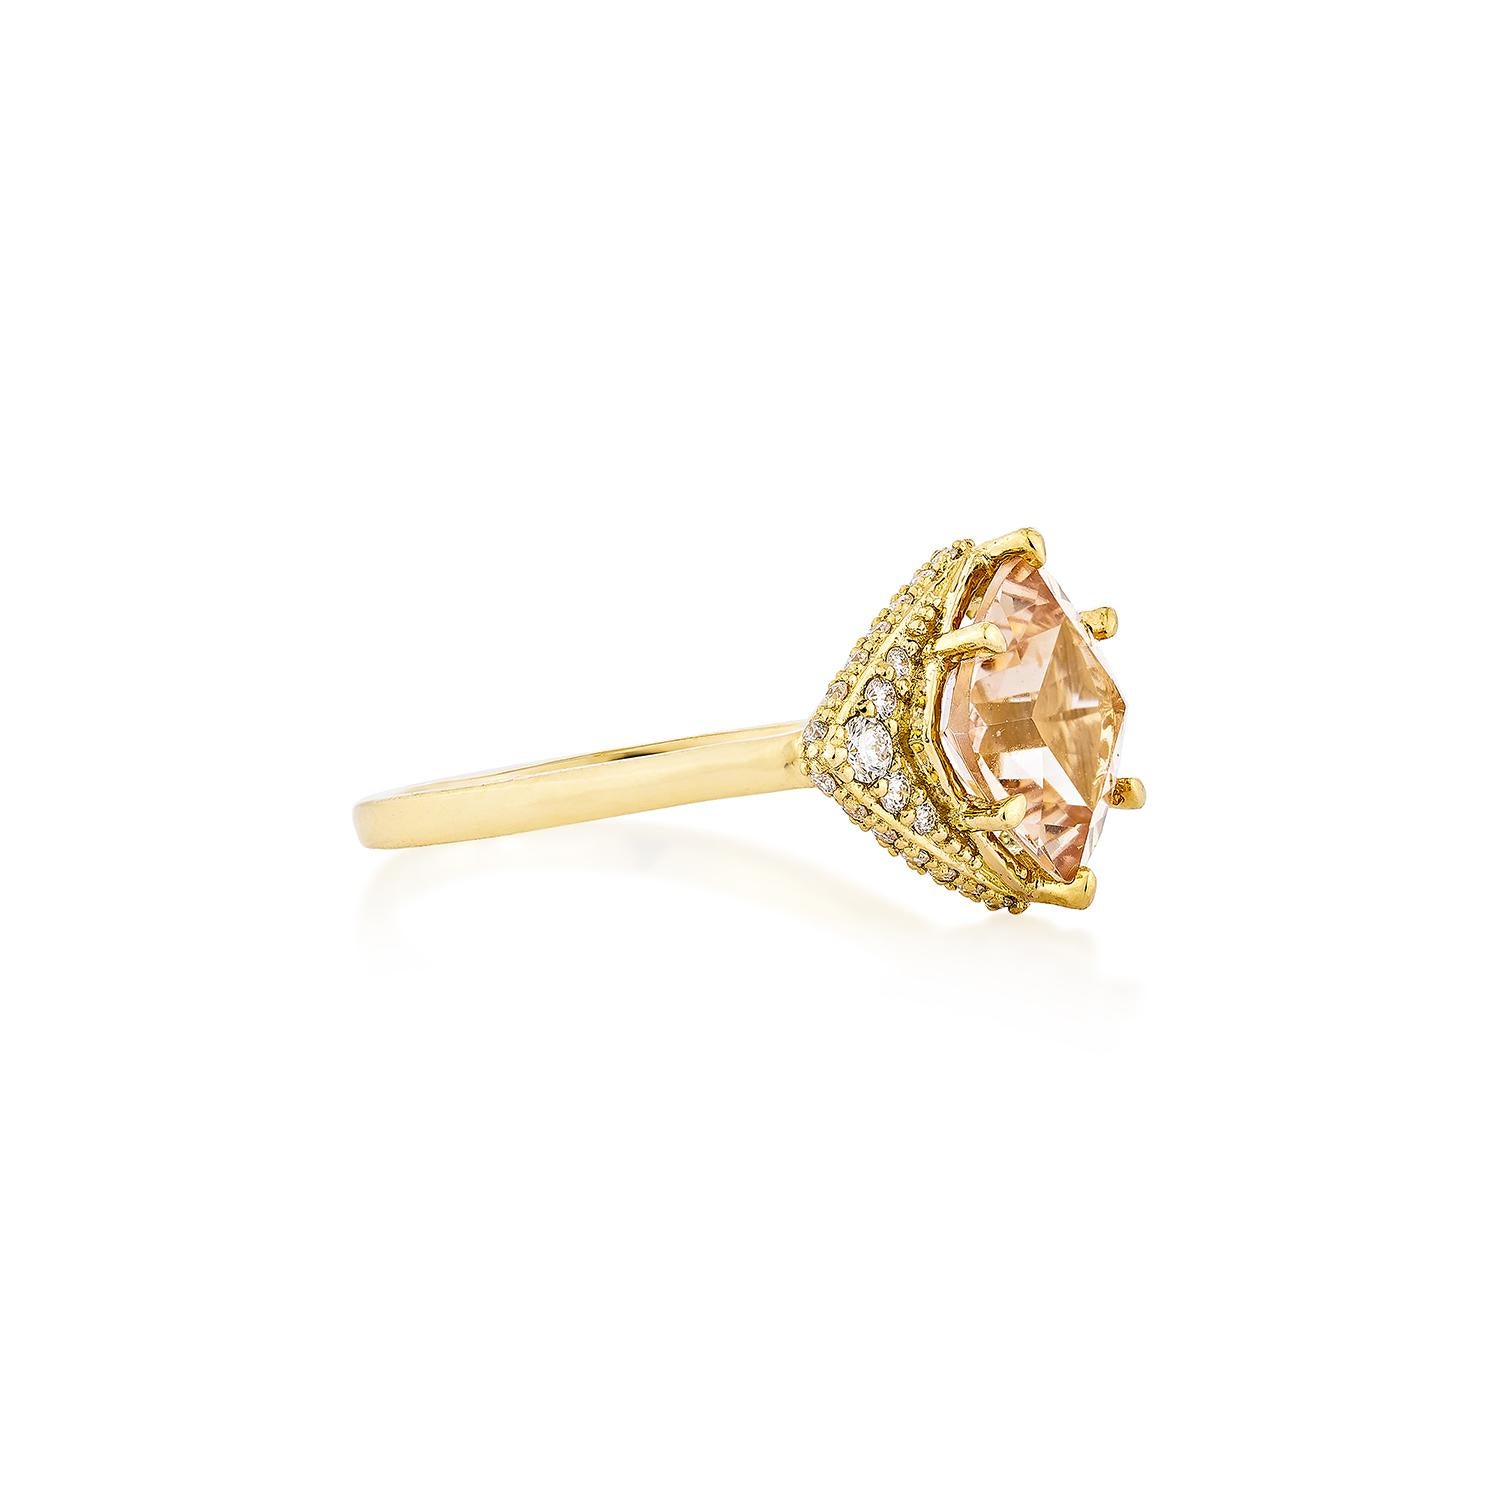 This collection includes a range of Morganite, which is a symbol of love and relationships, making it an excellent choice for a variety of applications. Accented with White Diamonds this ring is made in Yellow Gold and present a classic yet elegant